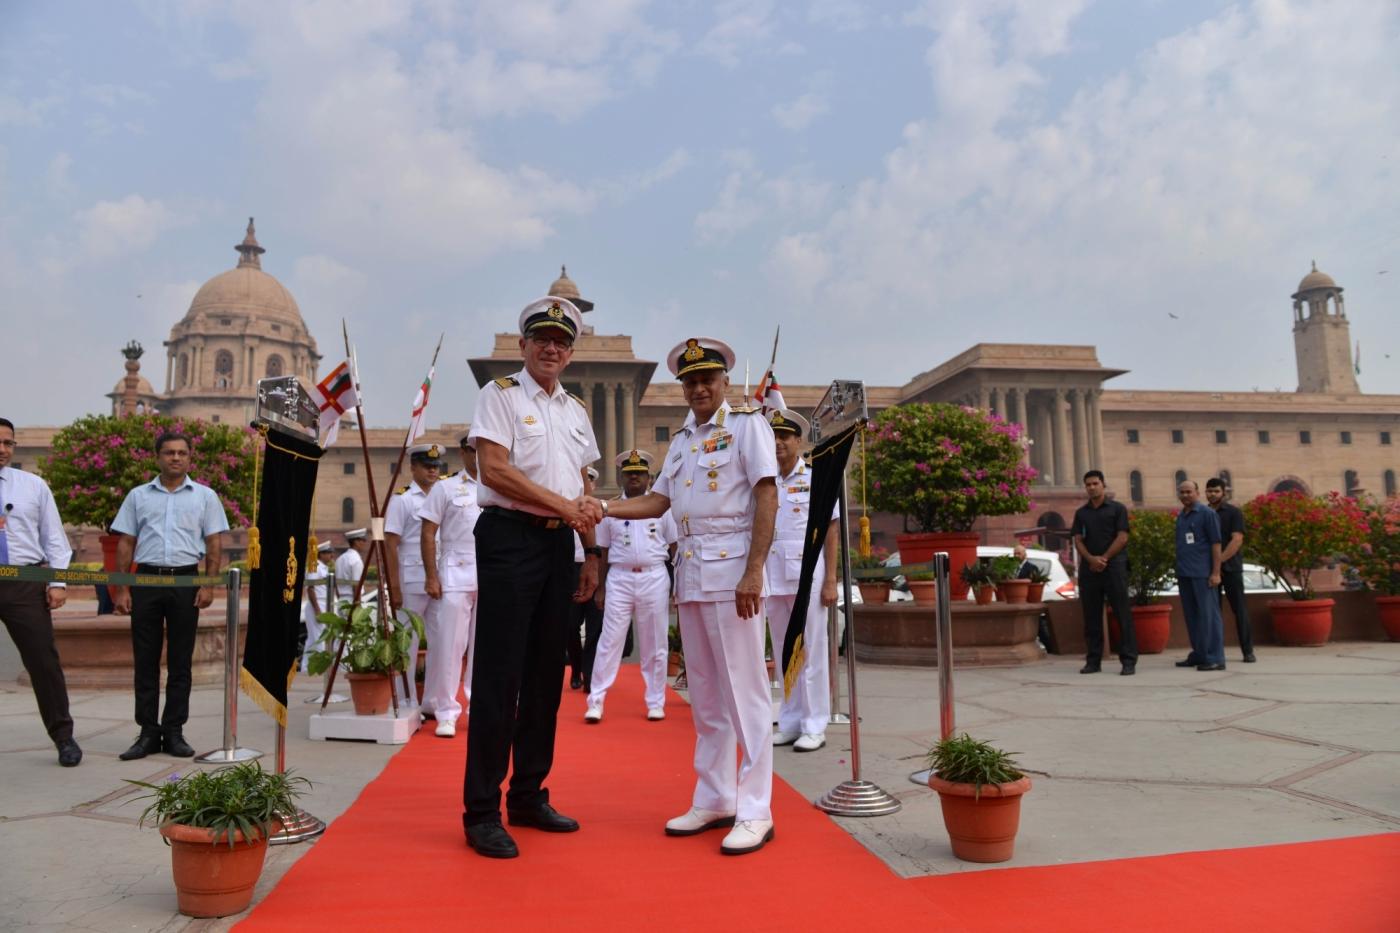 New Delhi: Chief of the Naval Staff, Admiral Sunil Lanba meets German Navy Chief Vice Admiral Andreas Krause at South Block in New Delhi, on Oct 18, 2018. (Photo: IANS) by .